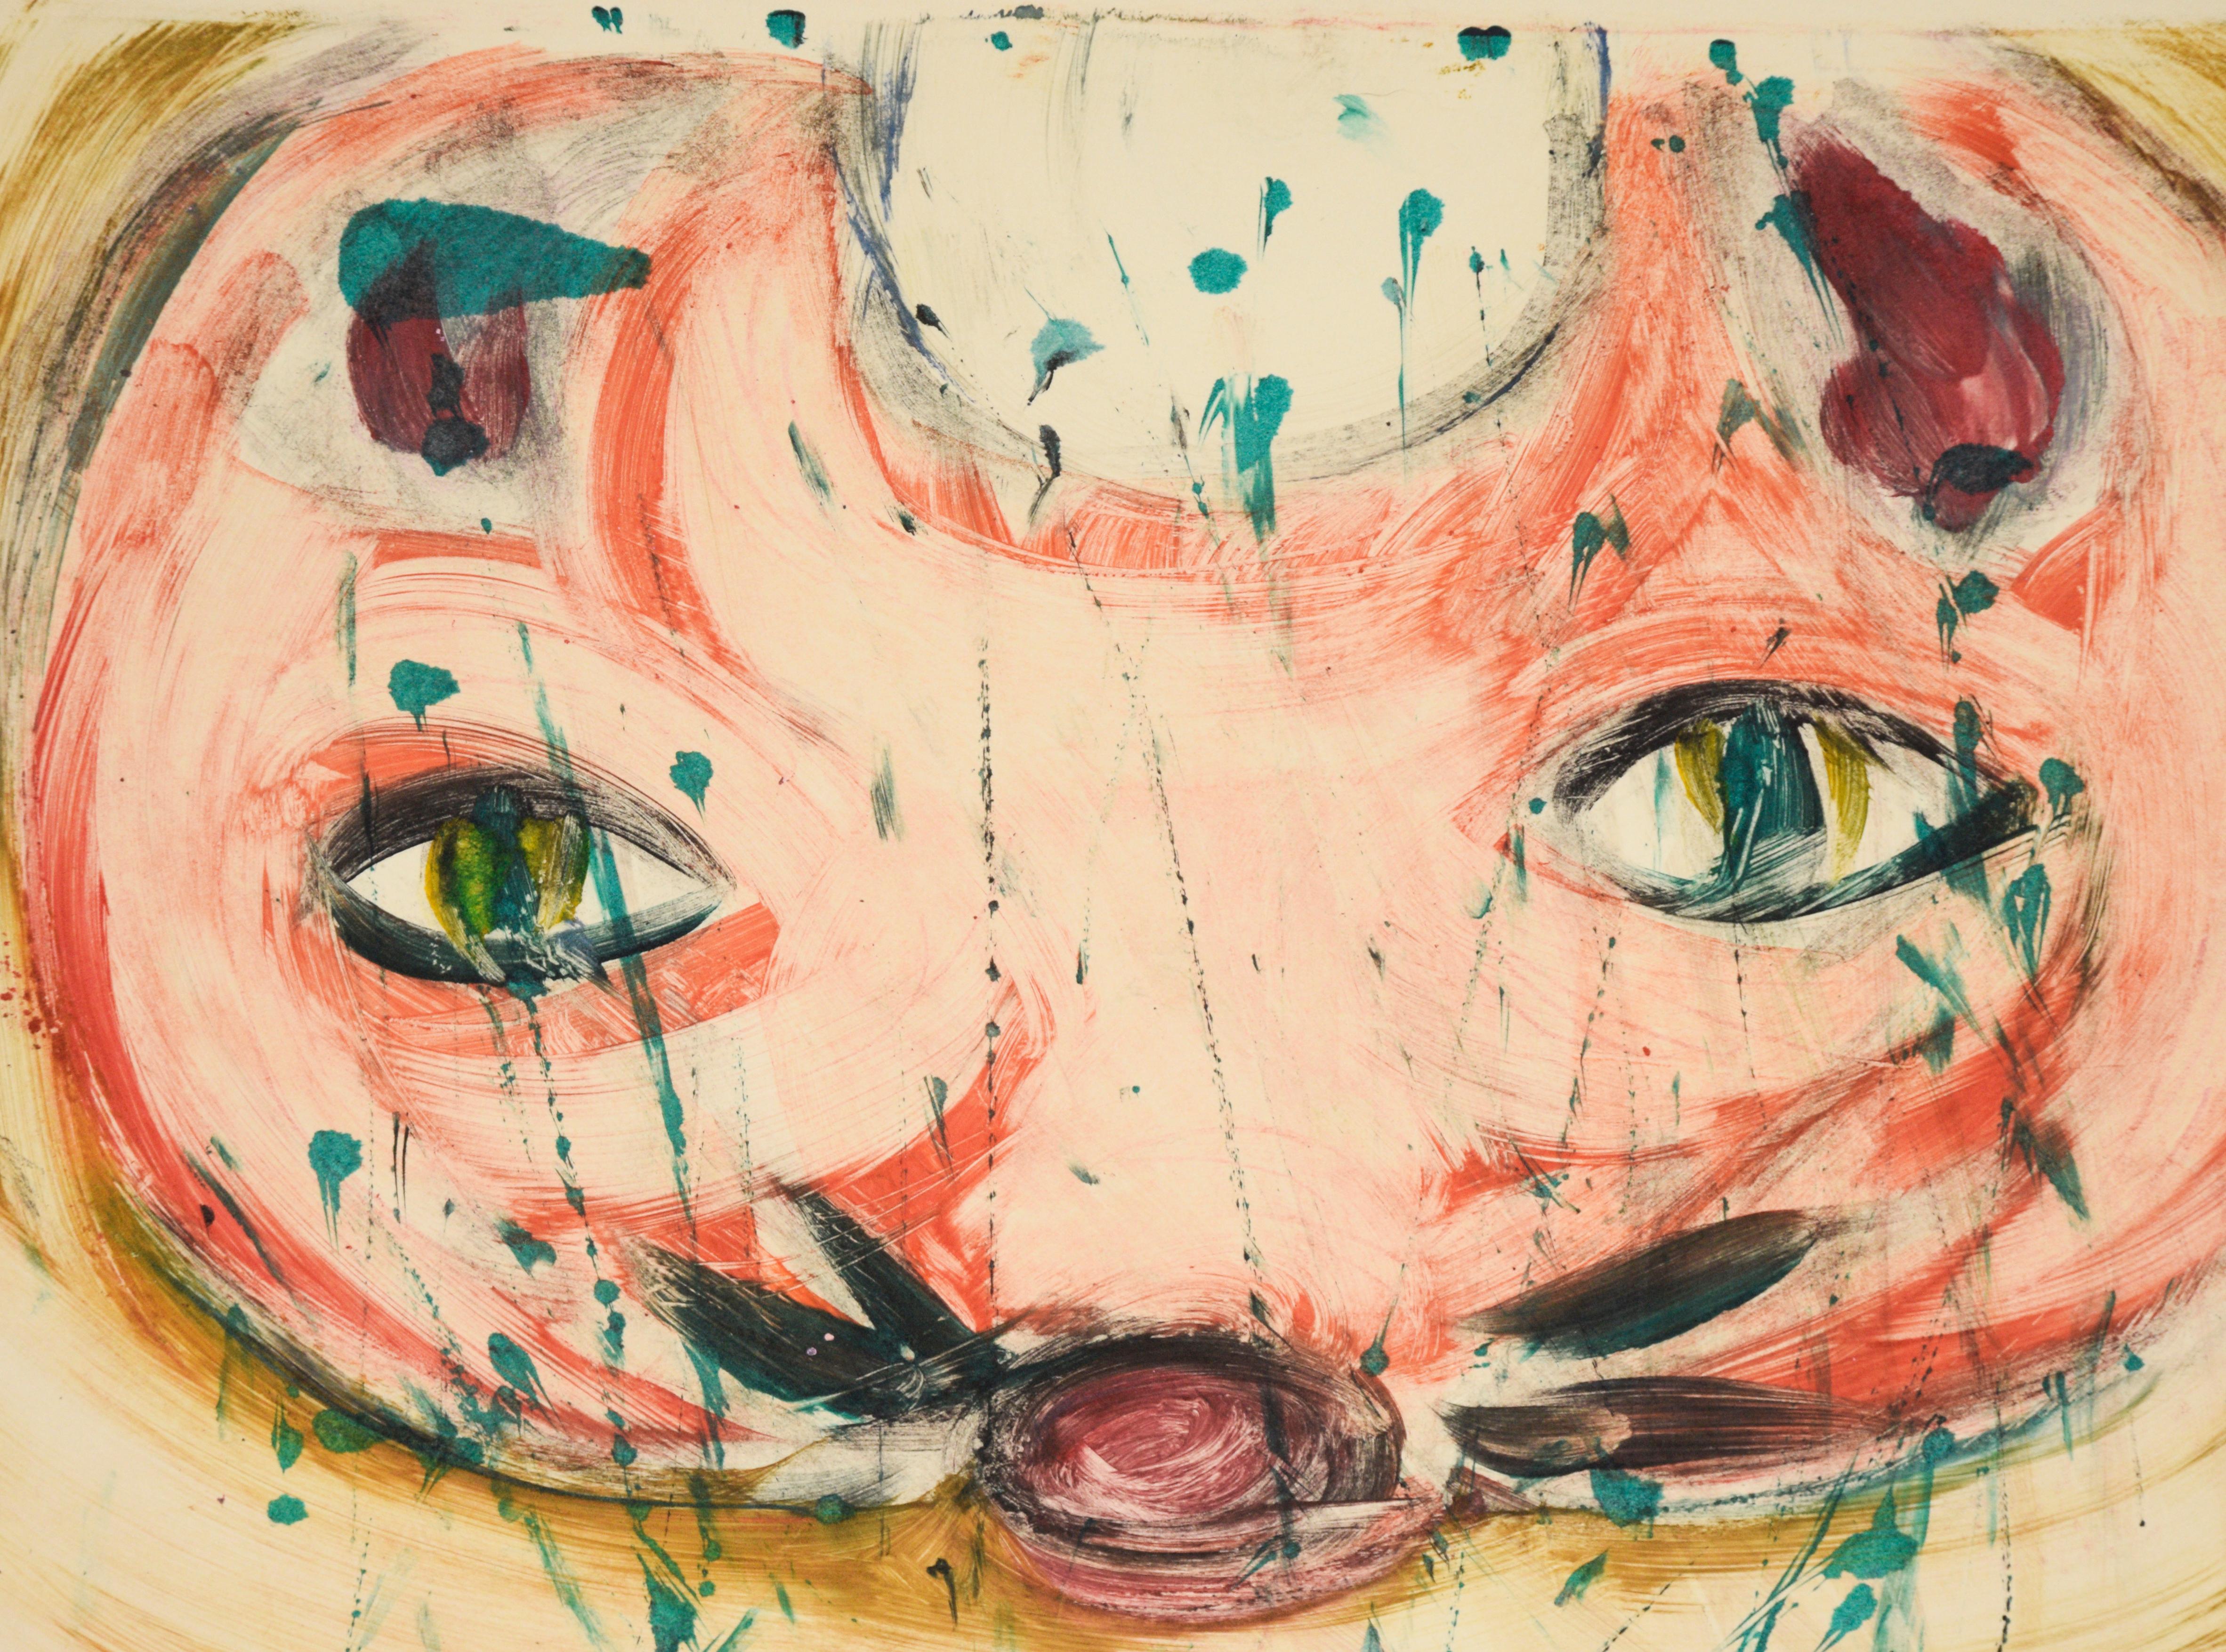 A Cat's Eyes - Transfer Monotype in Water Based Ink on Paper

Original transfer monotype painting by California artist Heather Speck (American, 20th C). Boldly colored close up of a cat's face. The cat's eyes of hazel and green are the focal point,